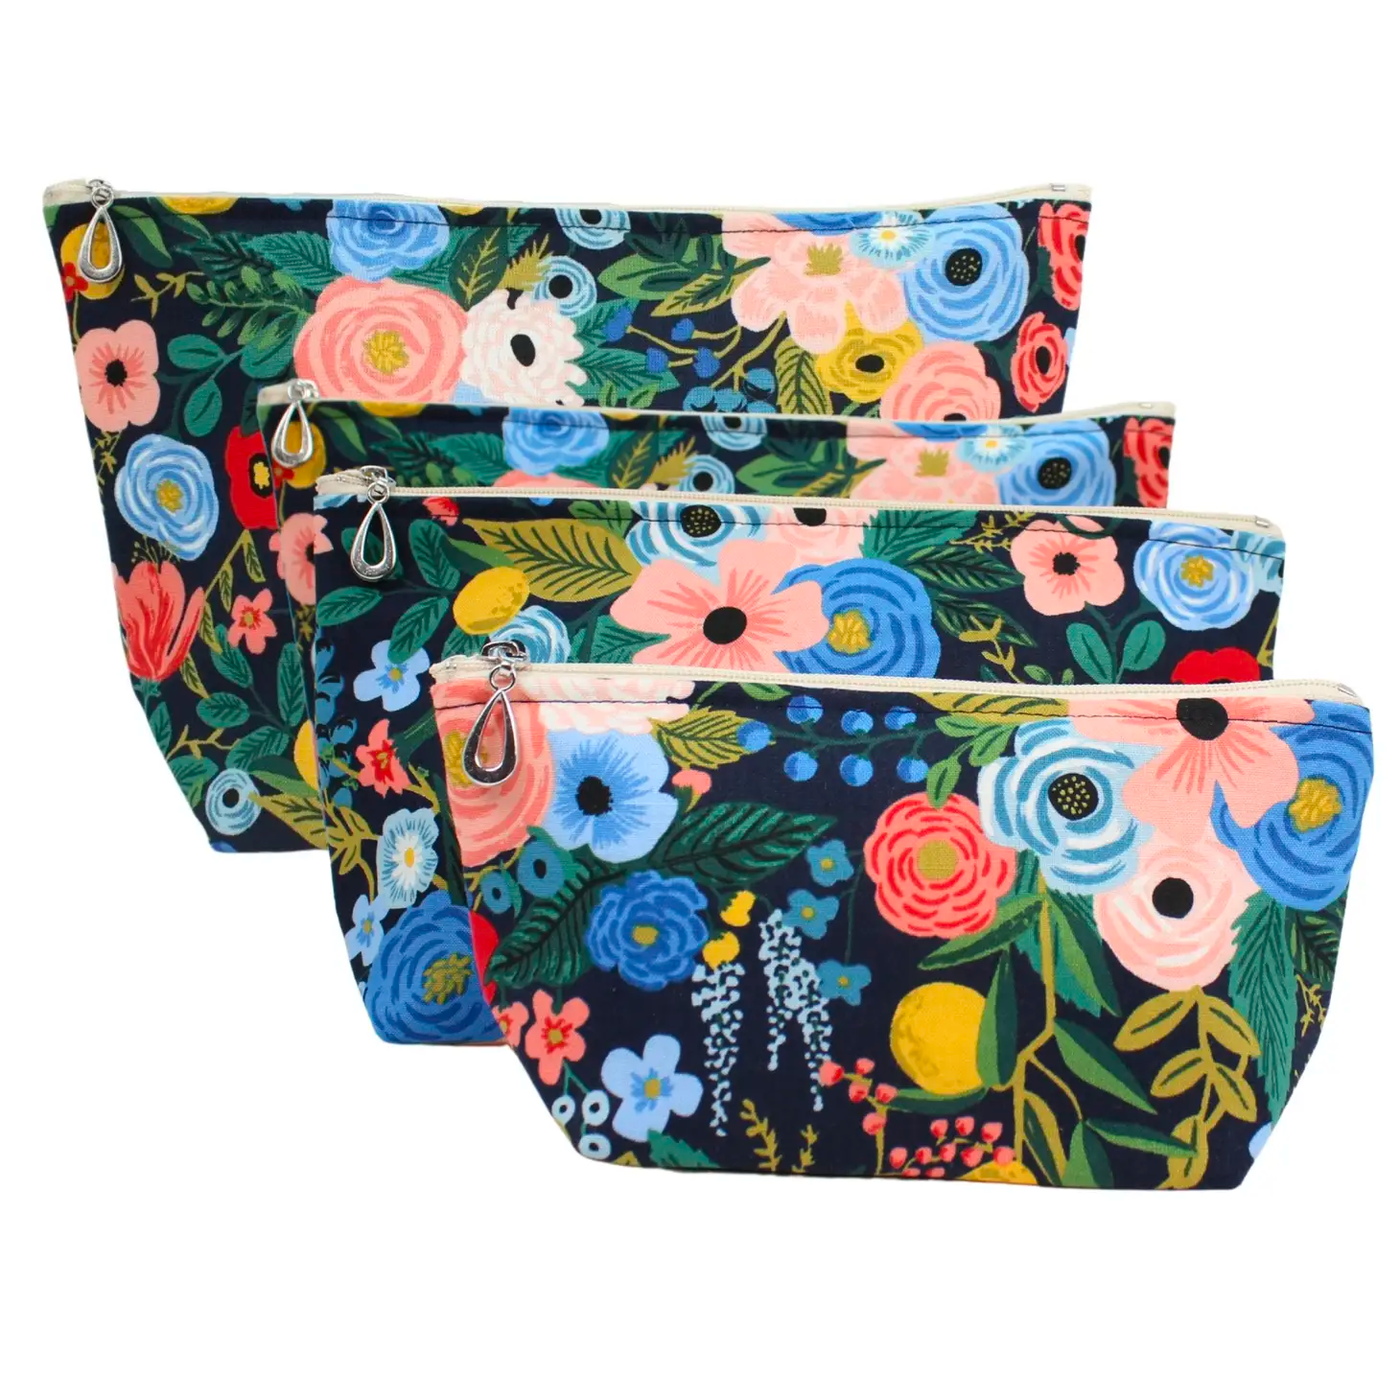 COSMETIC BAG NAVY FLORAL (Available in 2 Sizes)